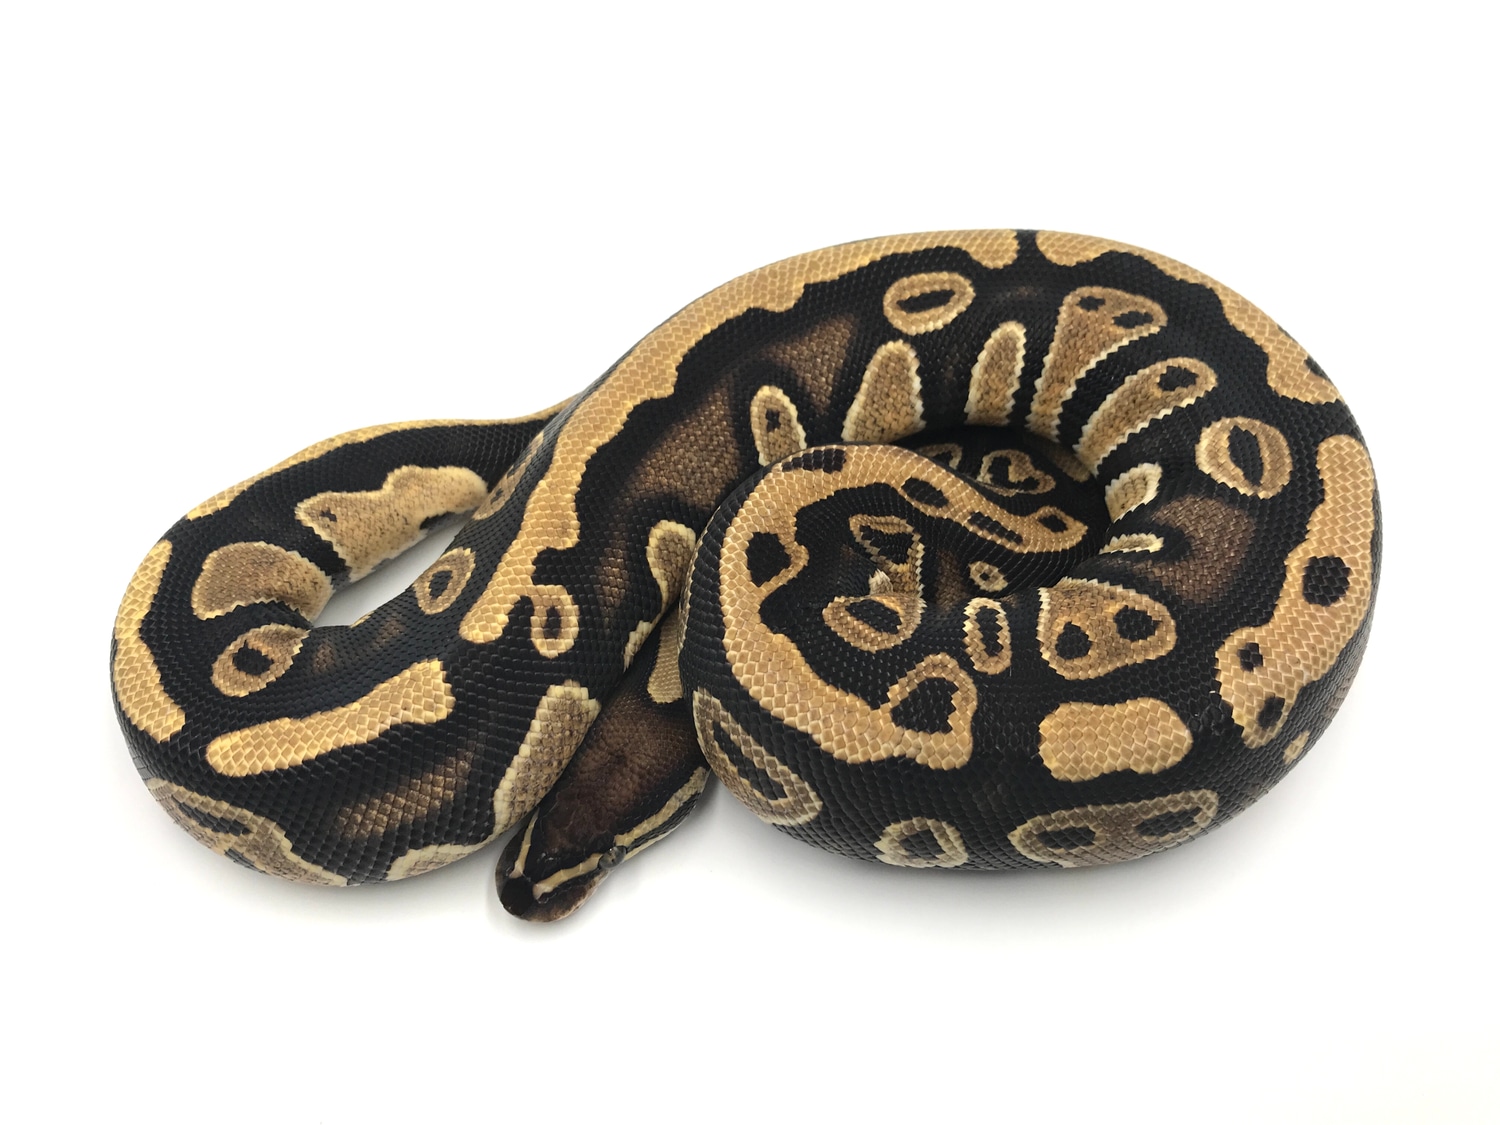 Wrecking Het Pied Ball Python by Wreck room snakes